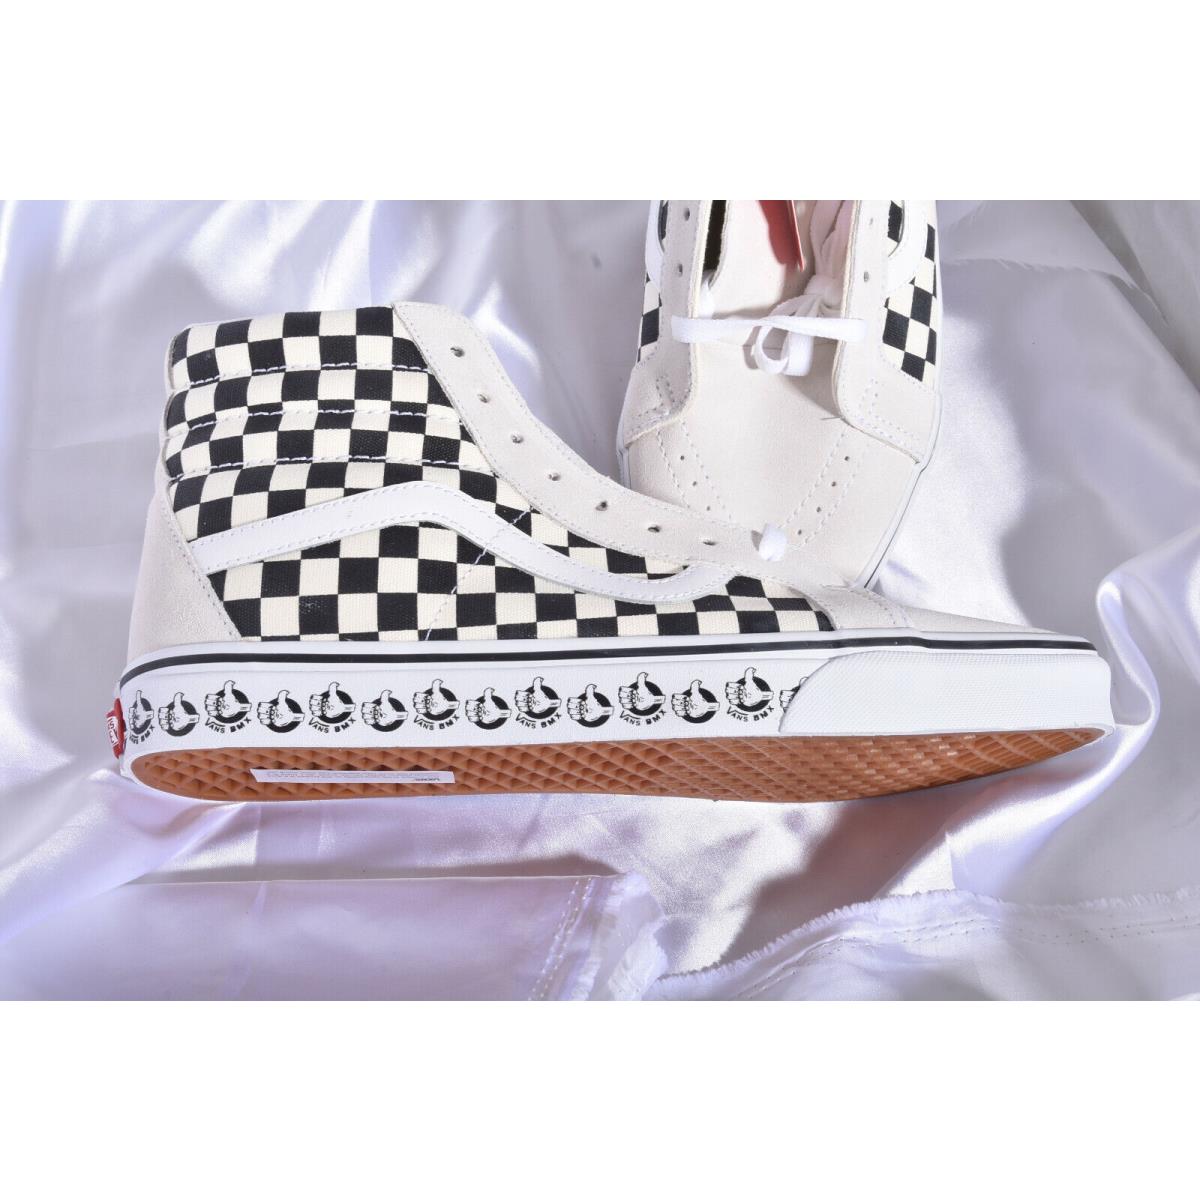 Vans Hi Sk8 Black White Checkerboard Sneakers Shoes Reissue Size 13